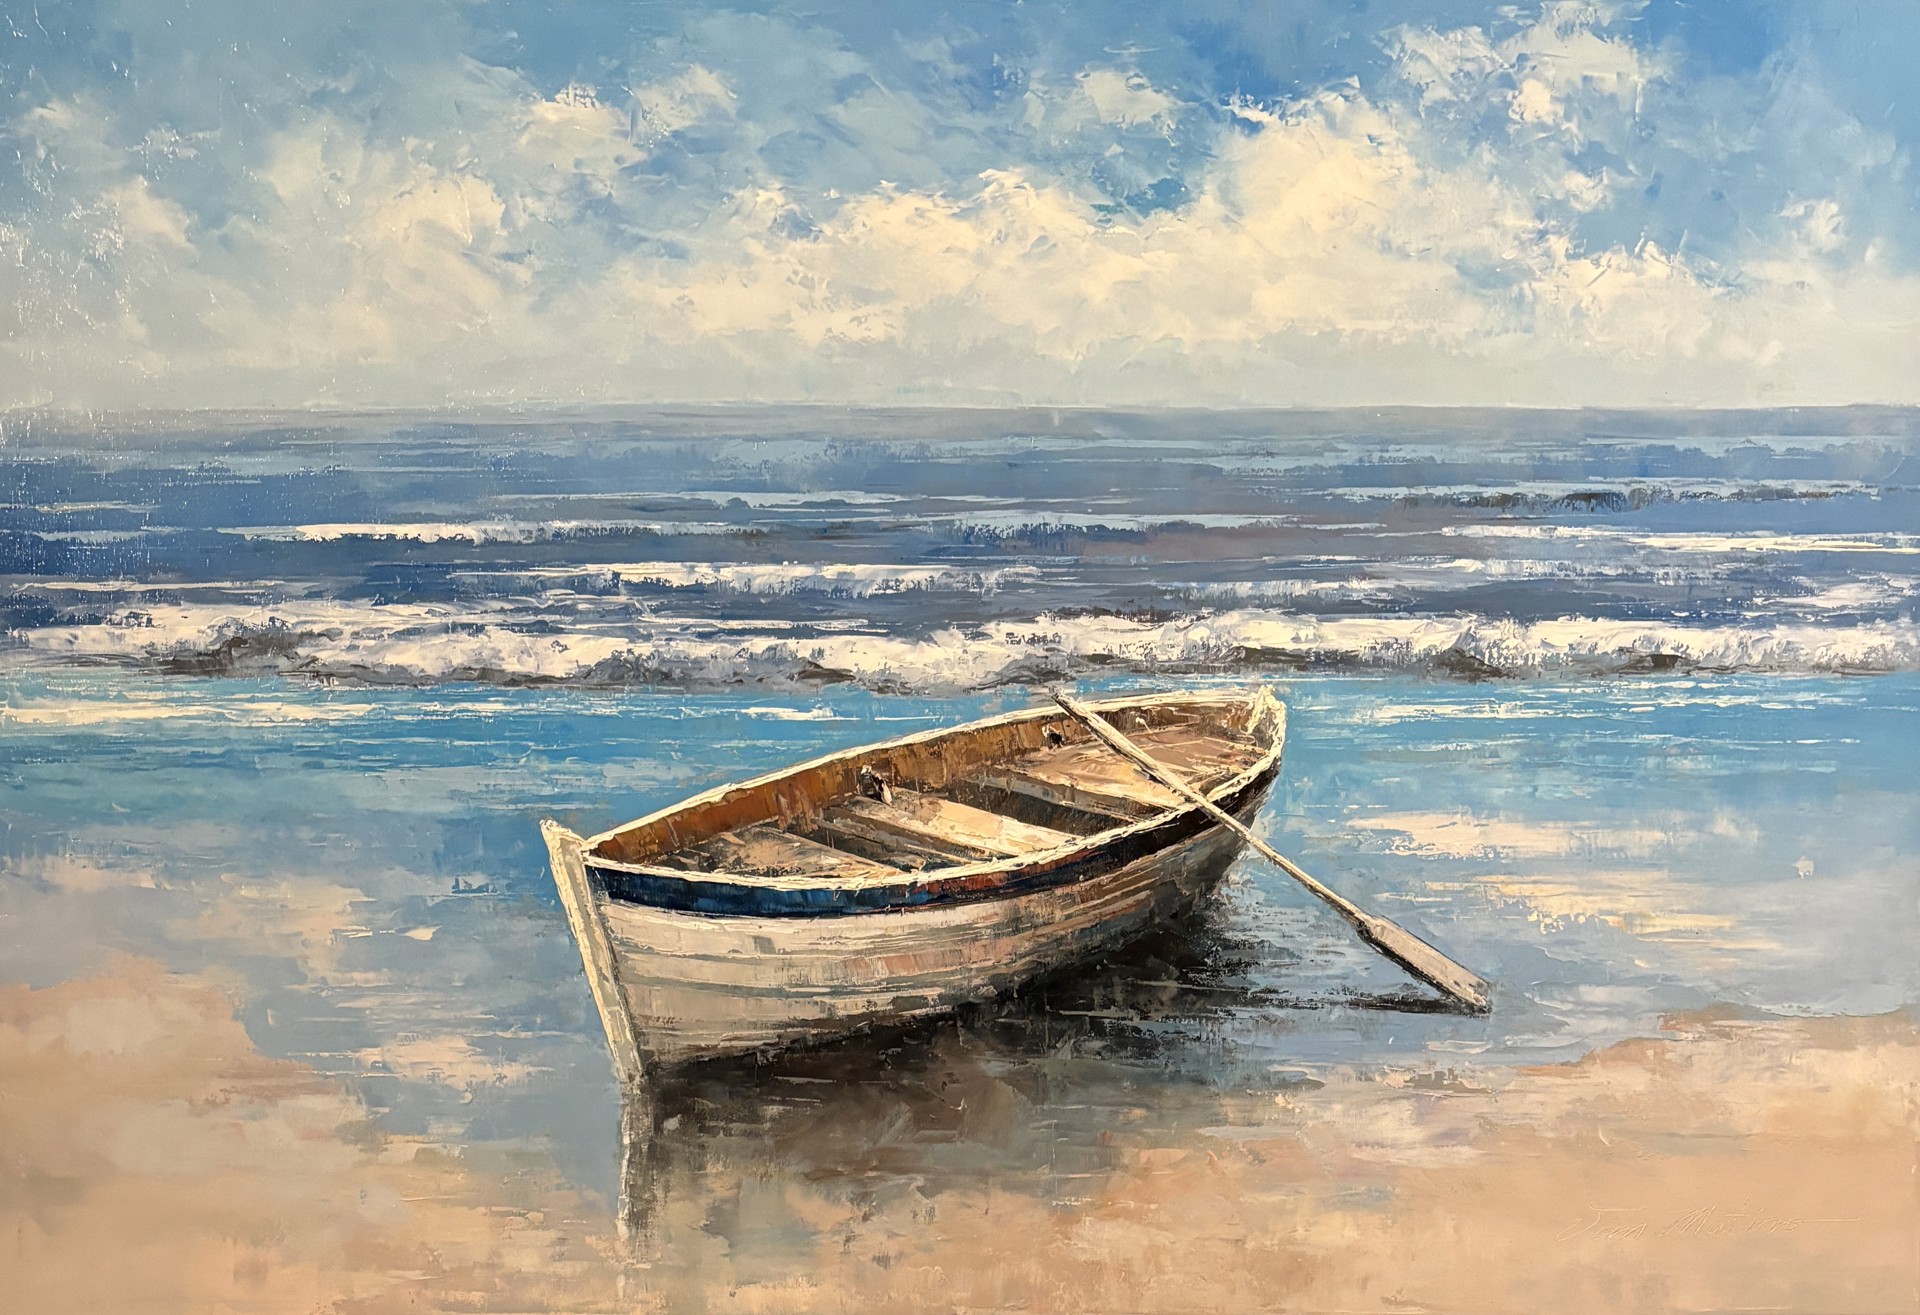 BOAT IN THE SURF by VAN MATINO